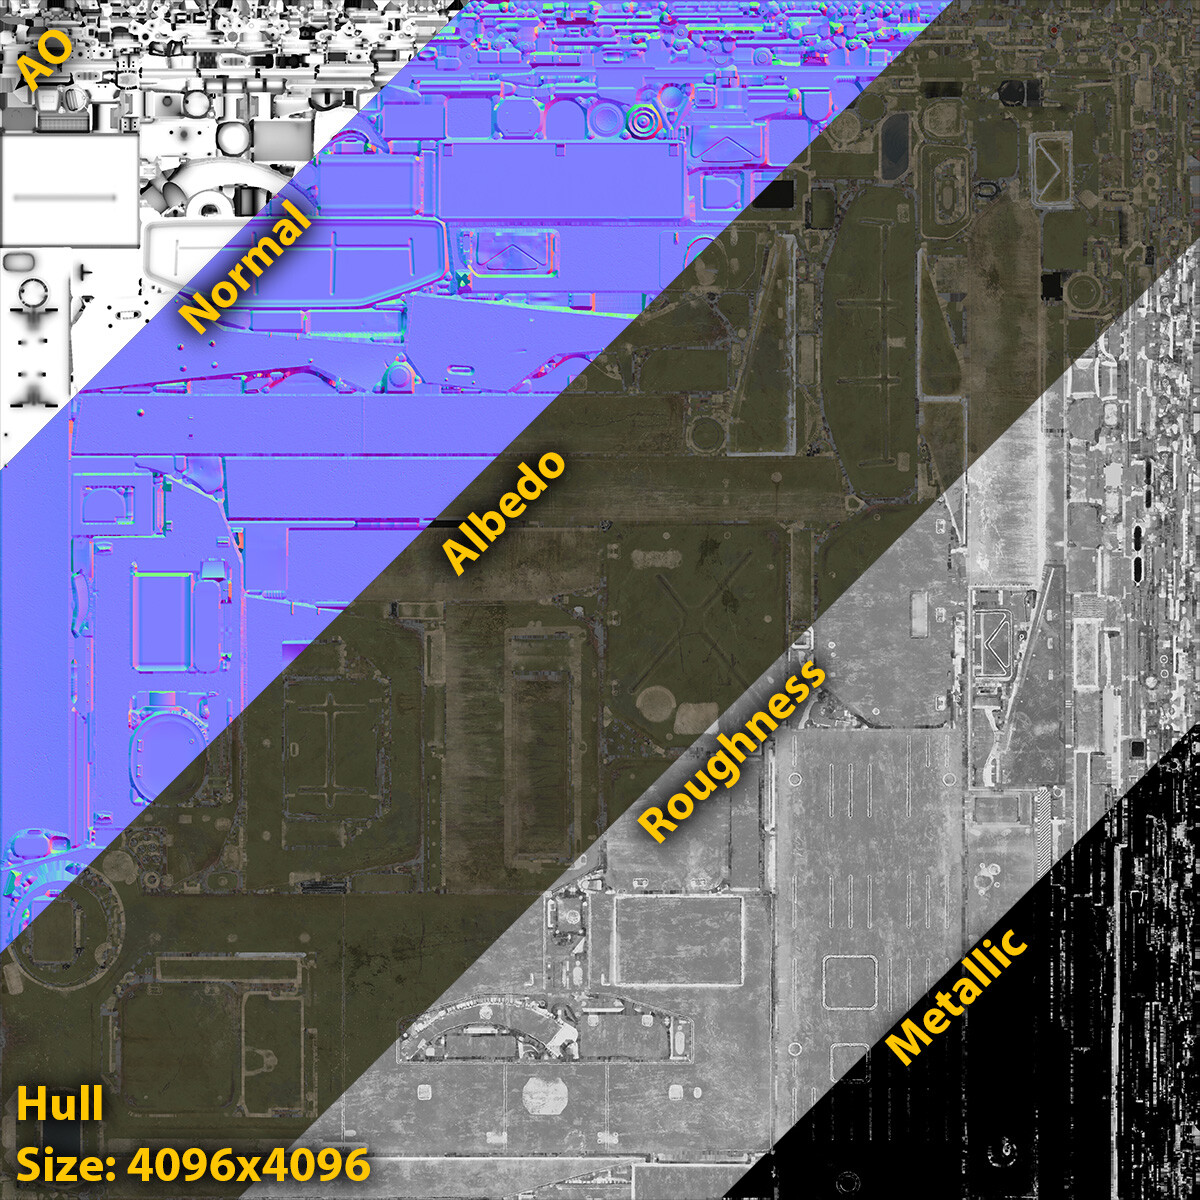 Texture for hull